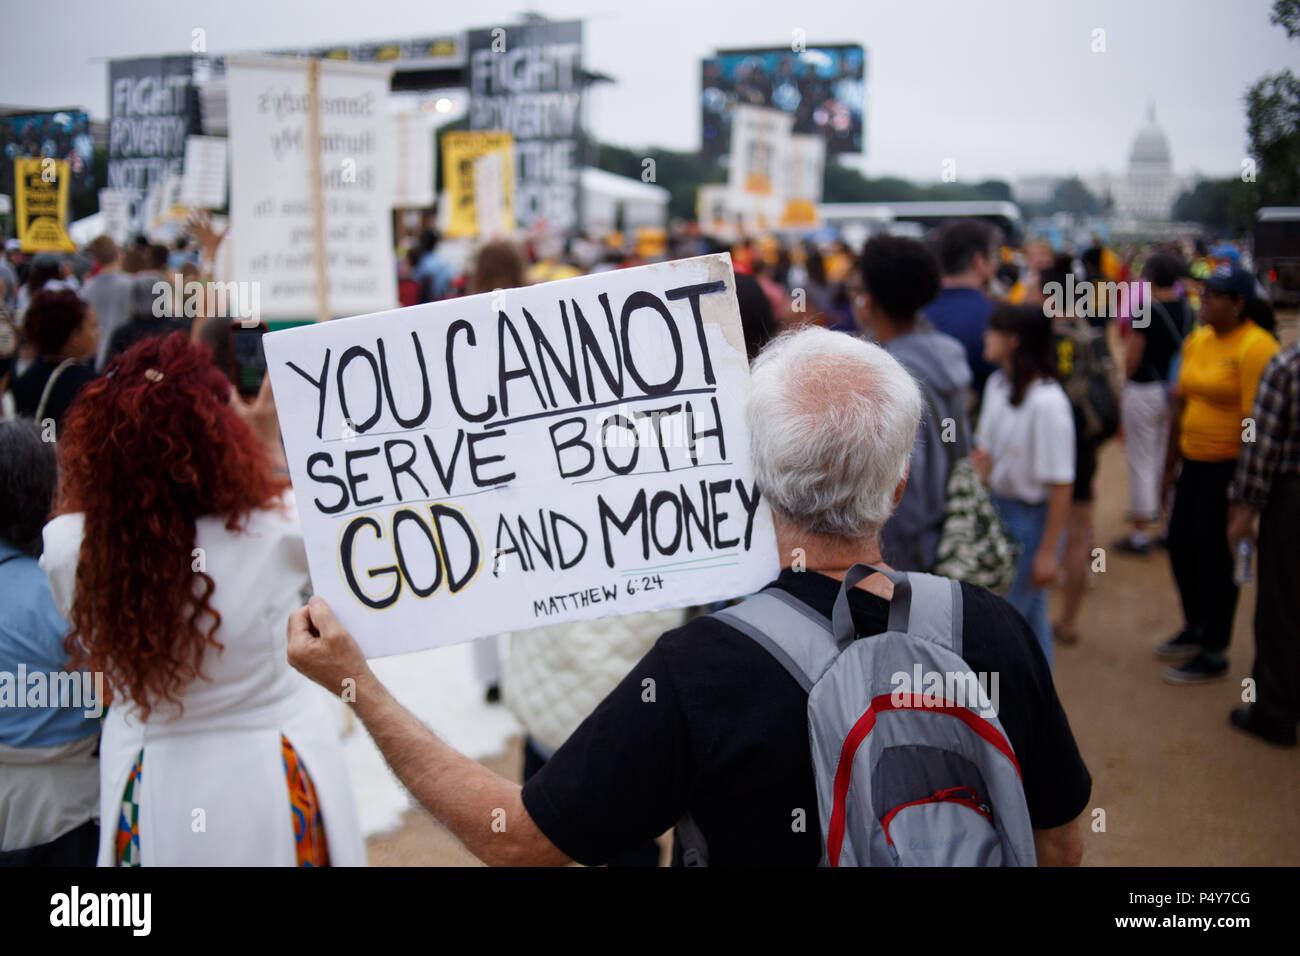 Washington, USA. 23rd June, 2018. Attendees gather at the Stand Against Poverty rally on the National Mall. The event is organized by the Poor People's Campaign, led by Rev. William Barber and Rev. Liz Theoharis and reviving a mission led by Dr. Martin Luther King, Jr. Credit: Michael Candelori/Pacific Press/Alamy Live News Stock Photo